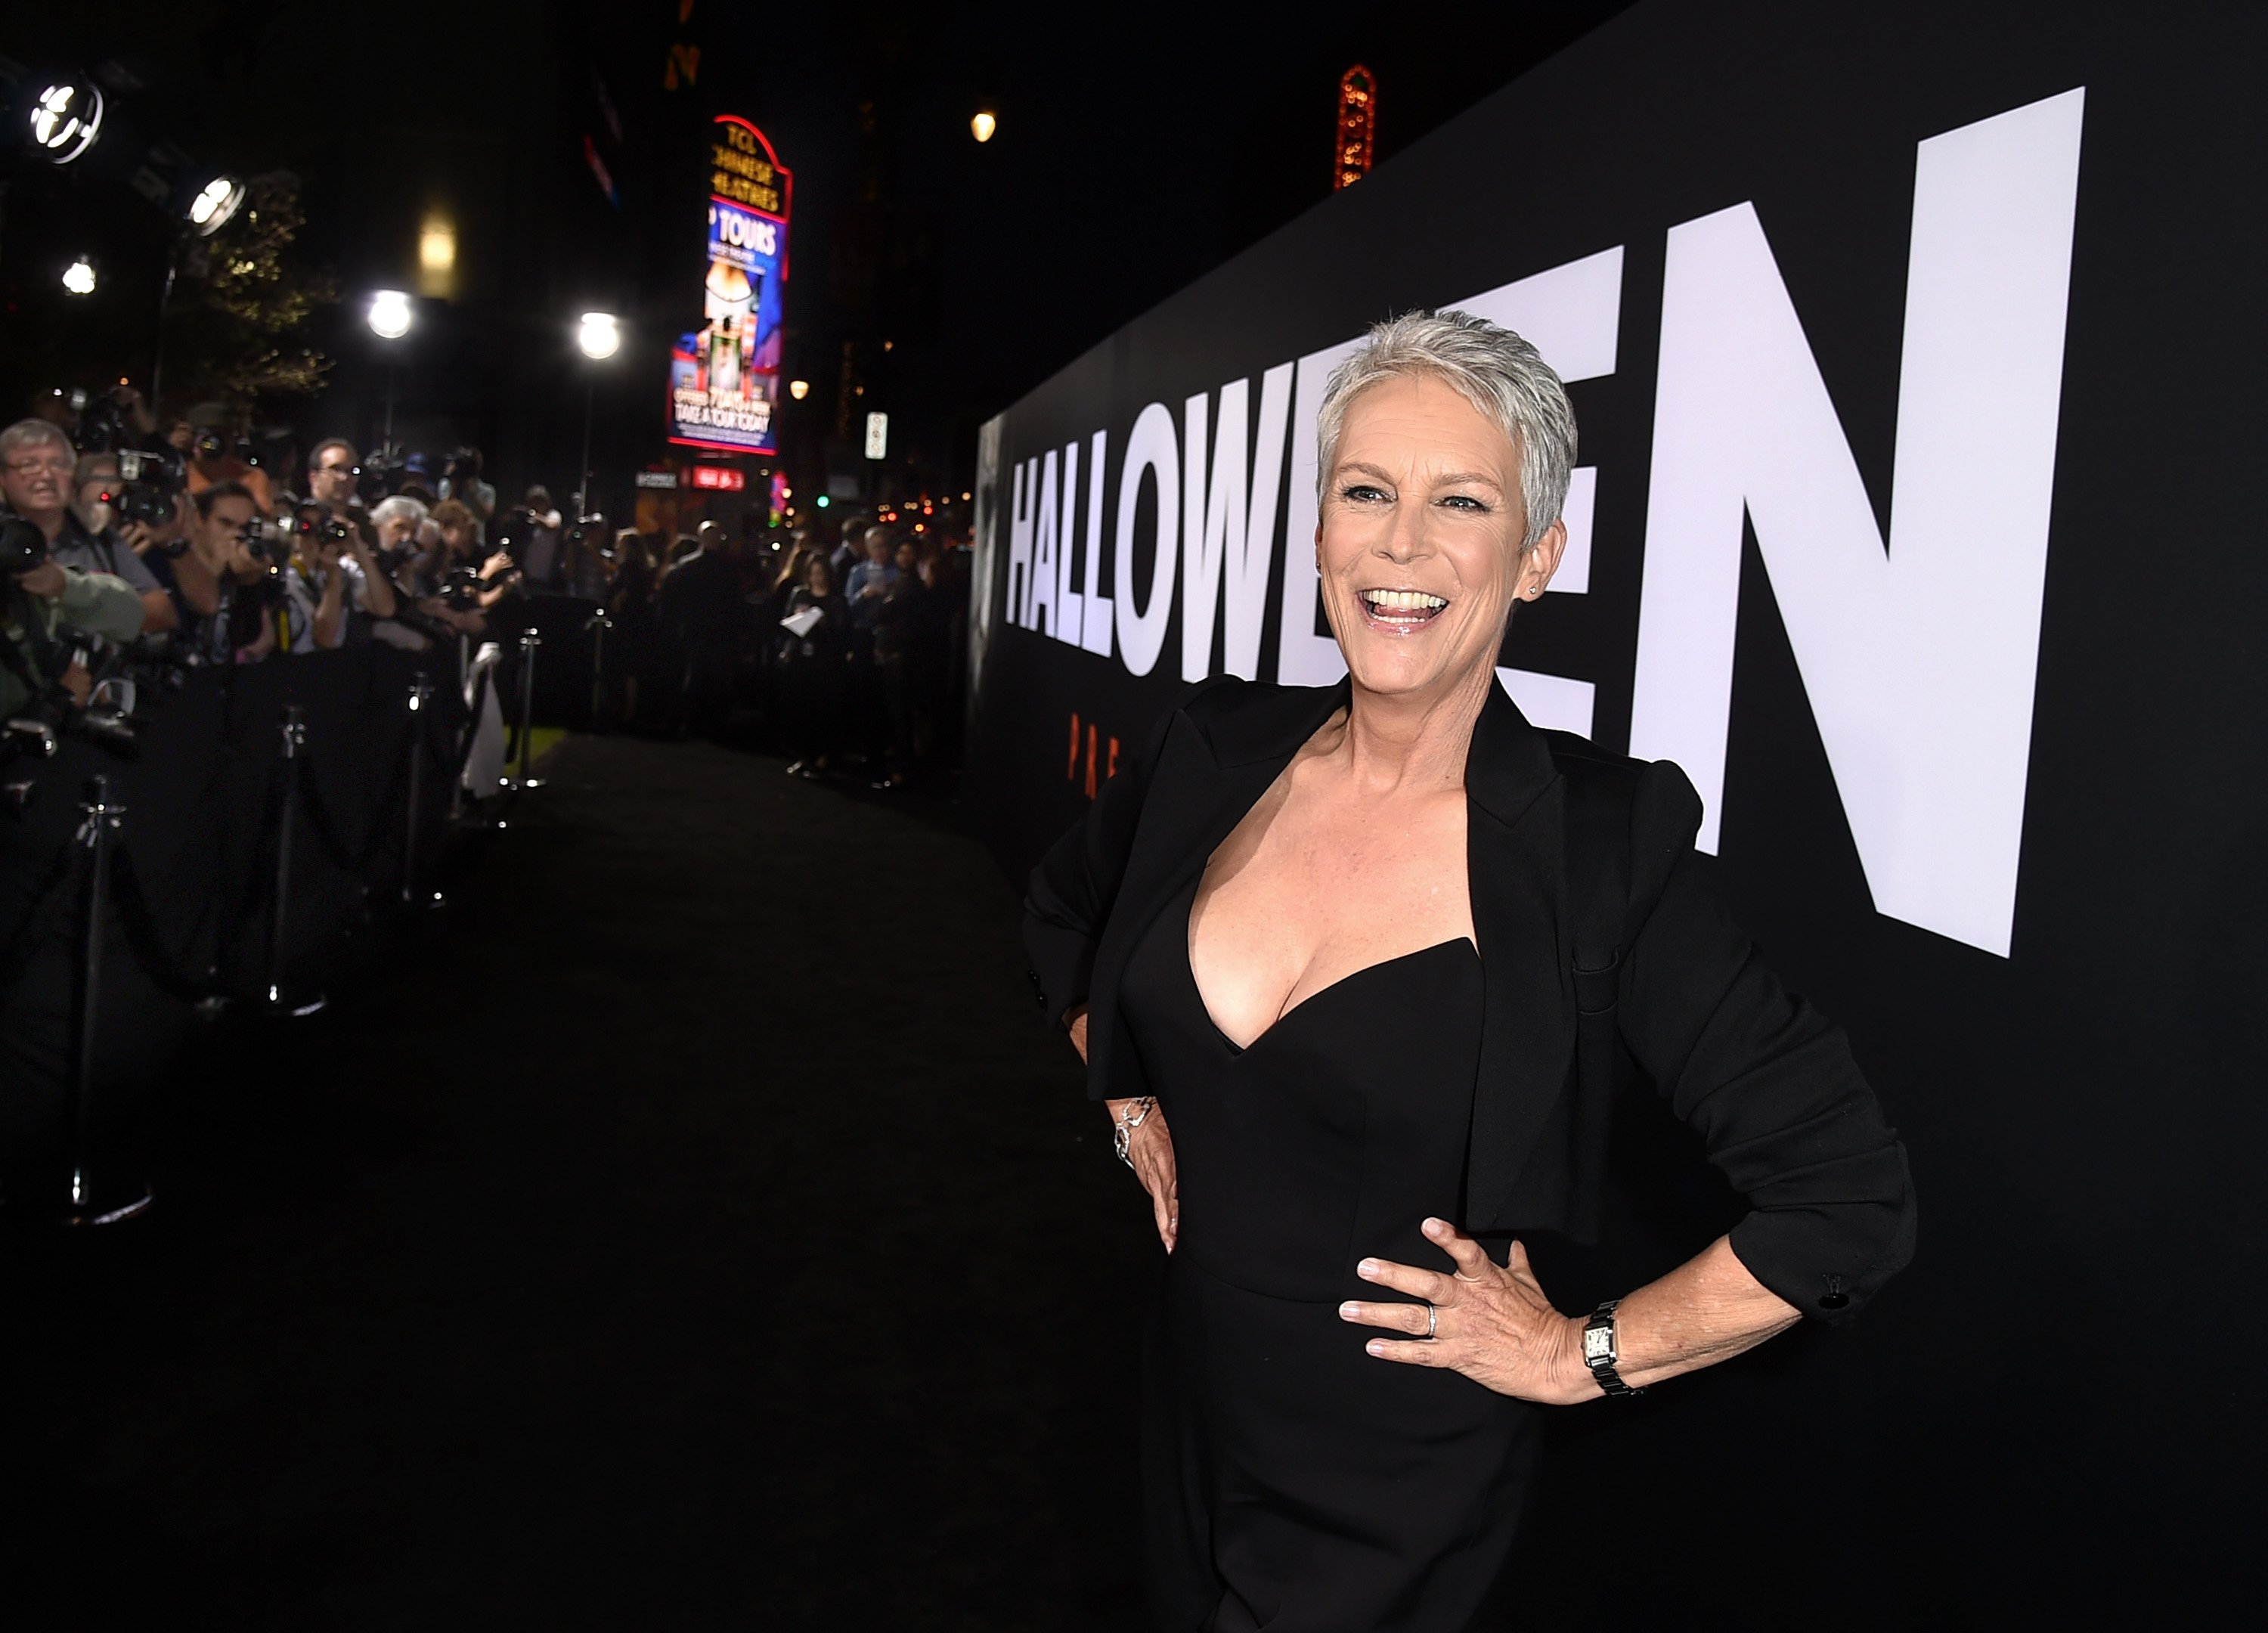 Jamie Lee Curtis arrives at the premiere of Universal Pictures' "Halloween" at the TCL Chinese Theatre on October 17, 2018 in Los Angeles, California | Photo: GettyImages